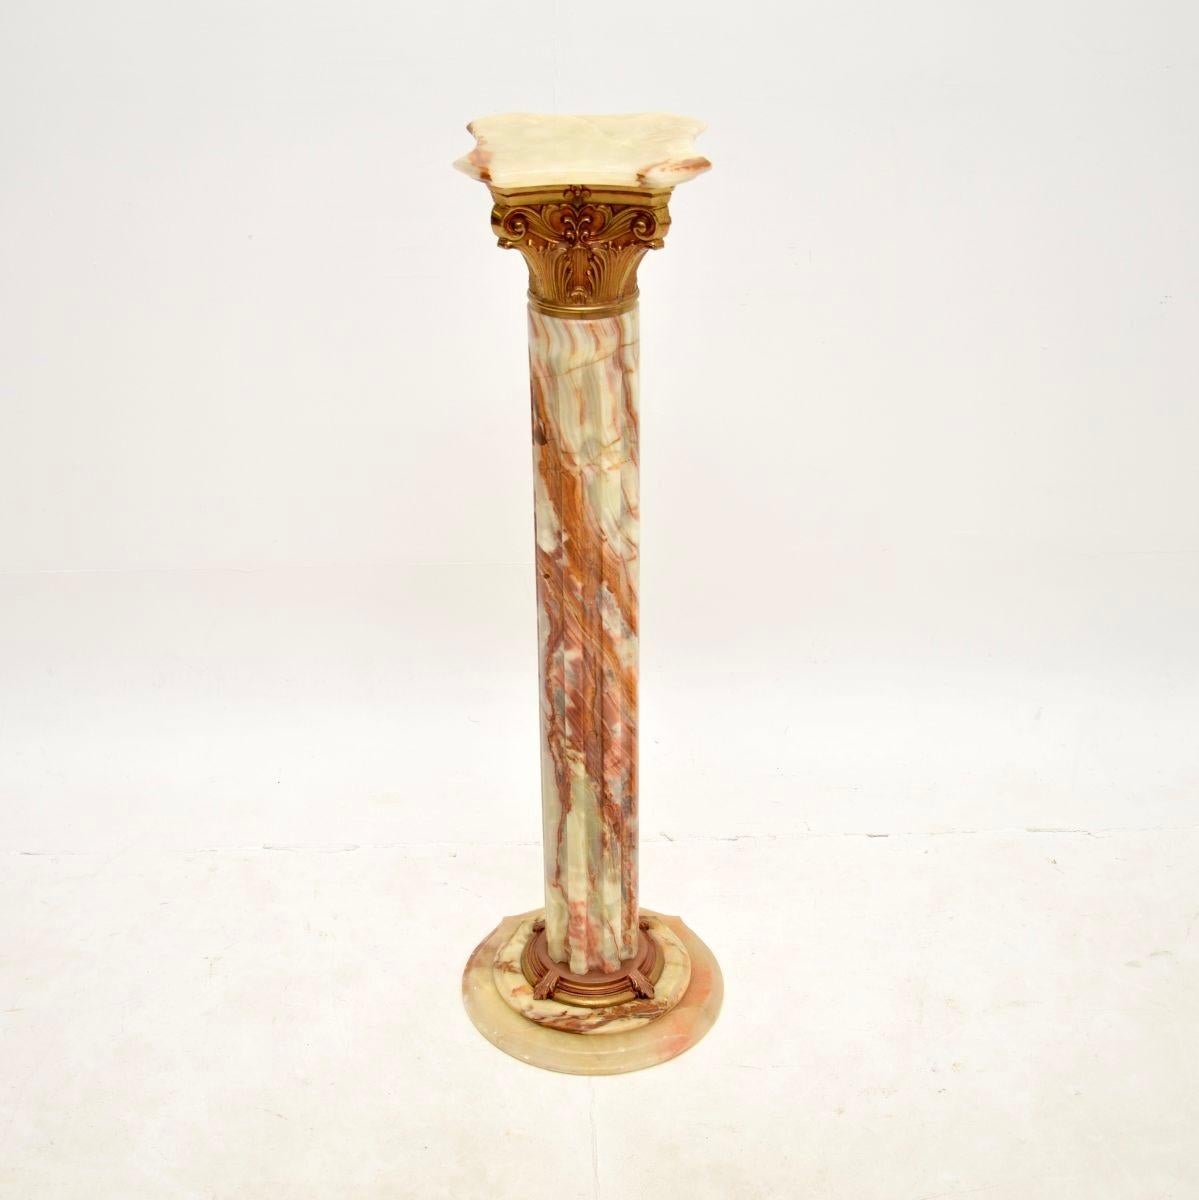 A stunning antique onyx and gilt metal Corinthian column. This was most likely made in Italy, it dates from around the 1930’s.

It is of superb quality, the design of a neo classical Corinthian column is most impressive and stylish. It has fluted